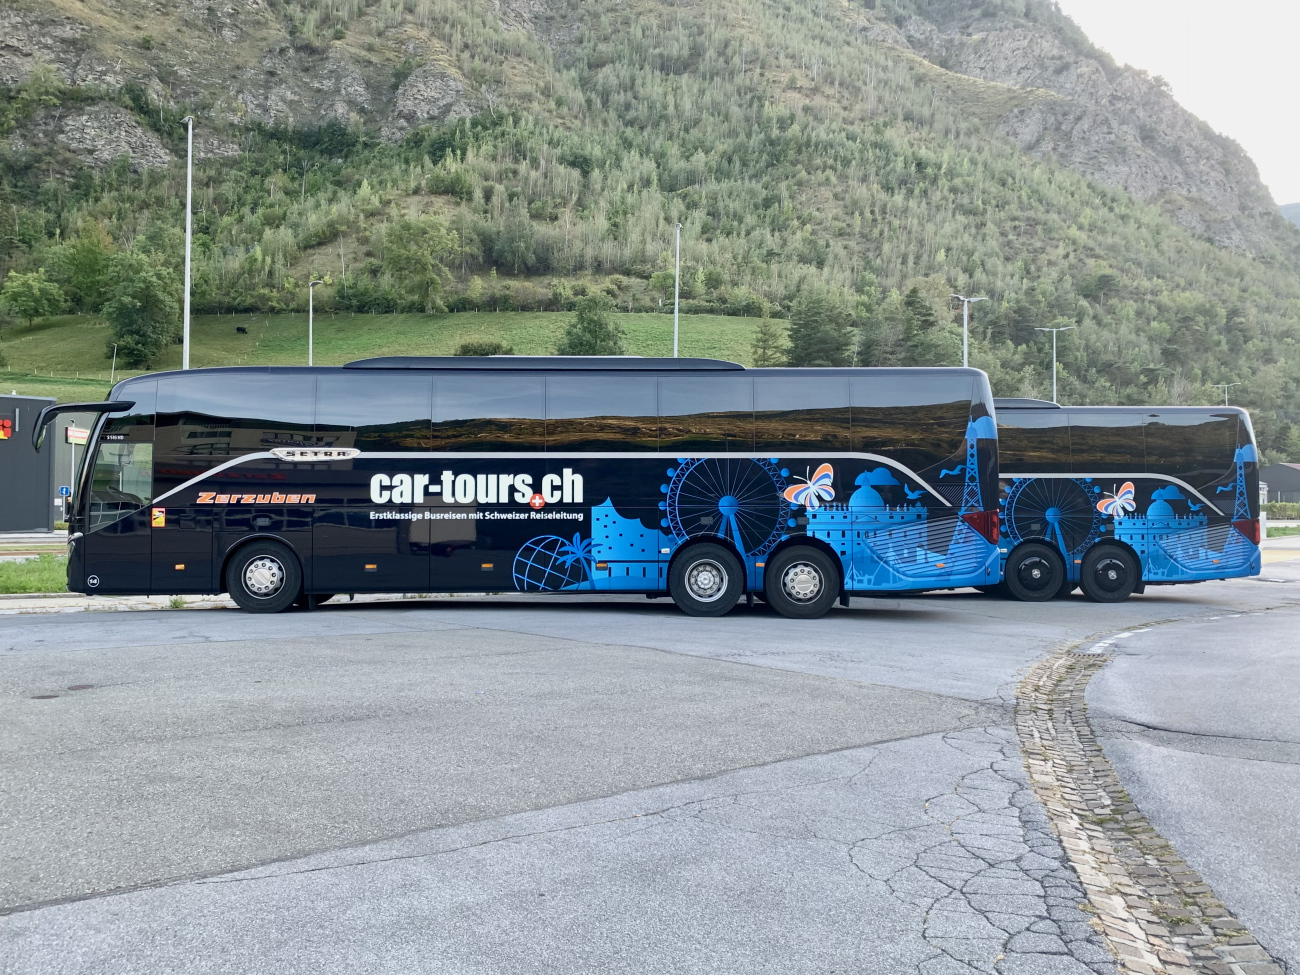 Sion, Setra S516HD/3 Facelift # 14